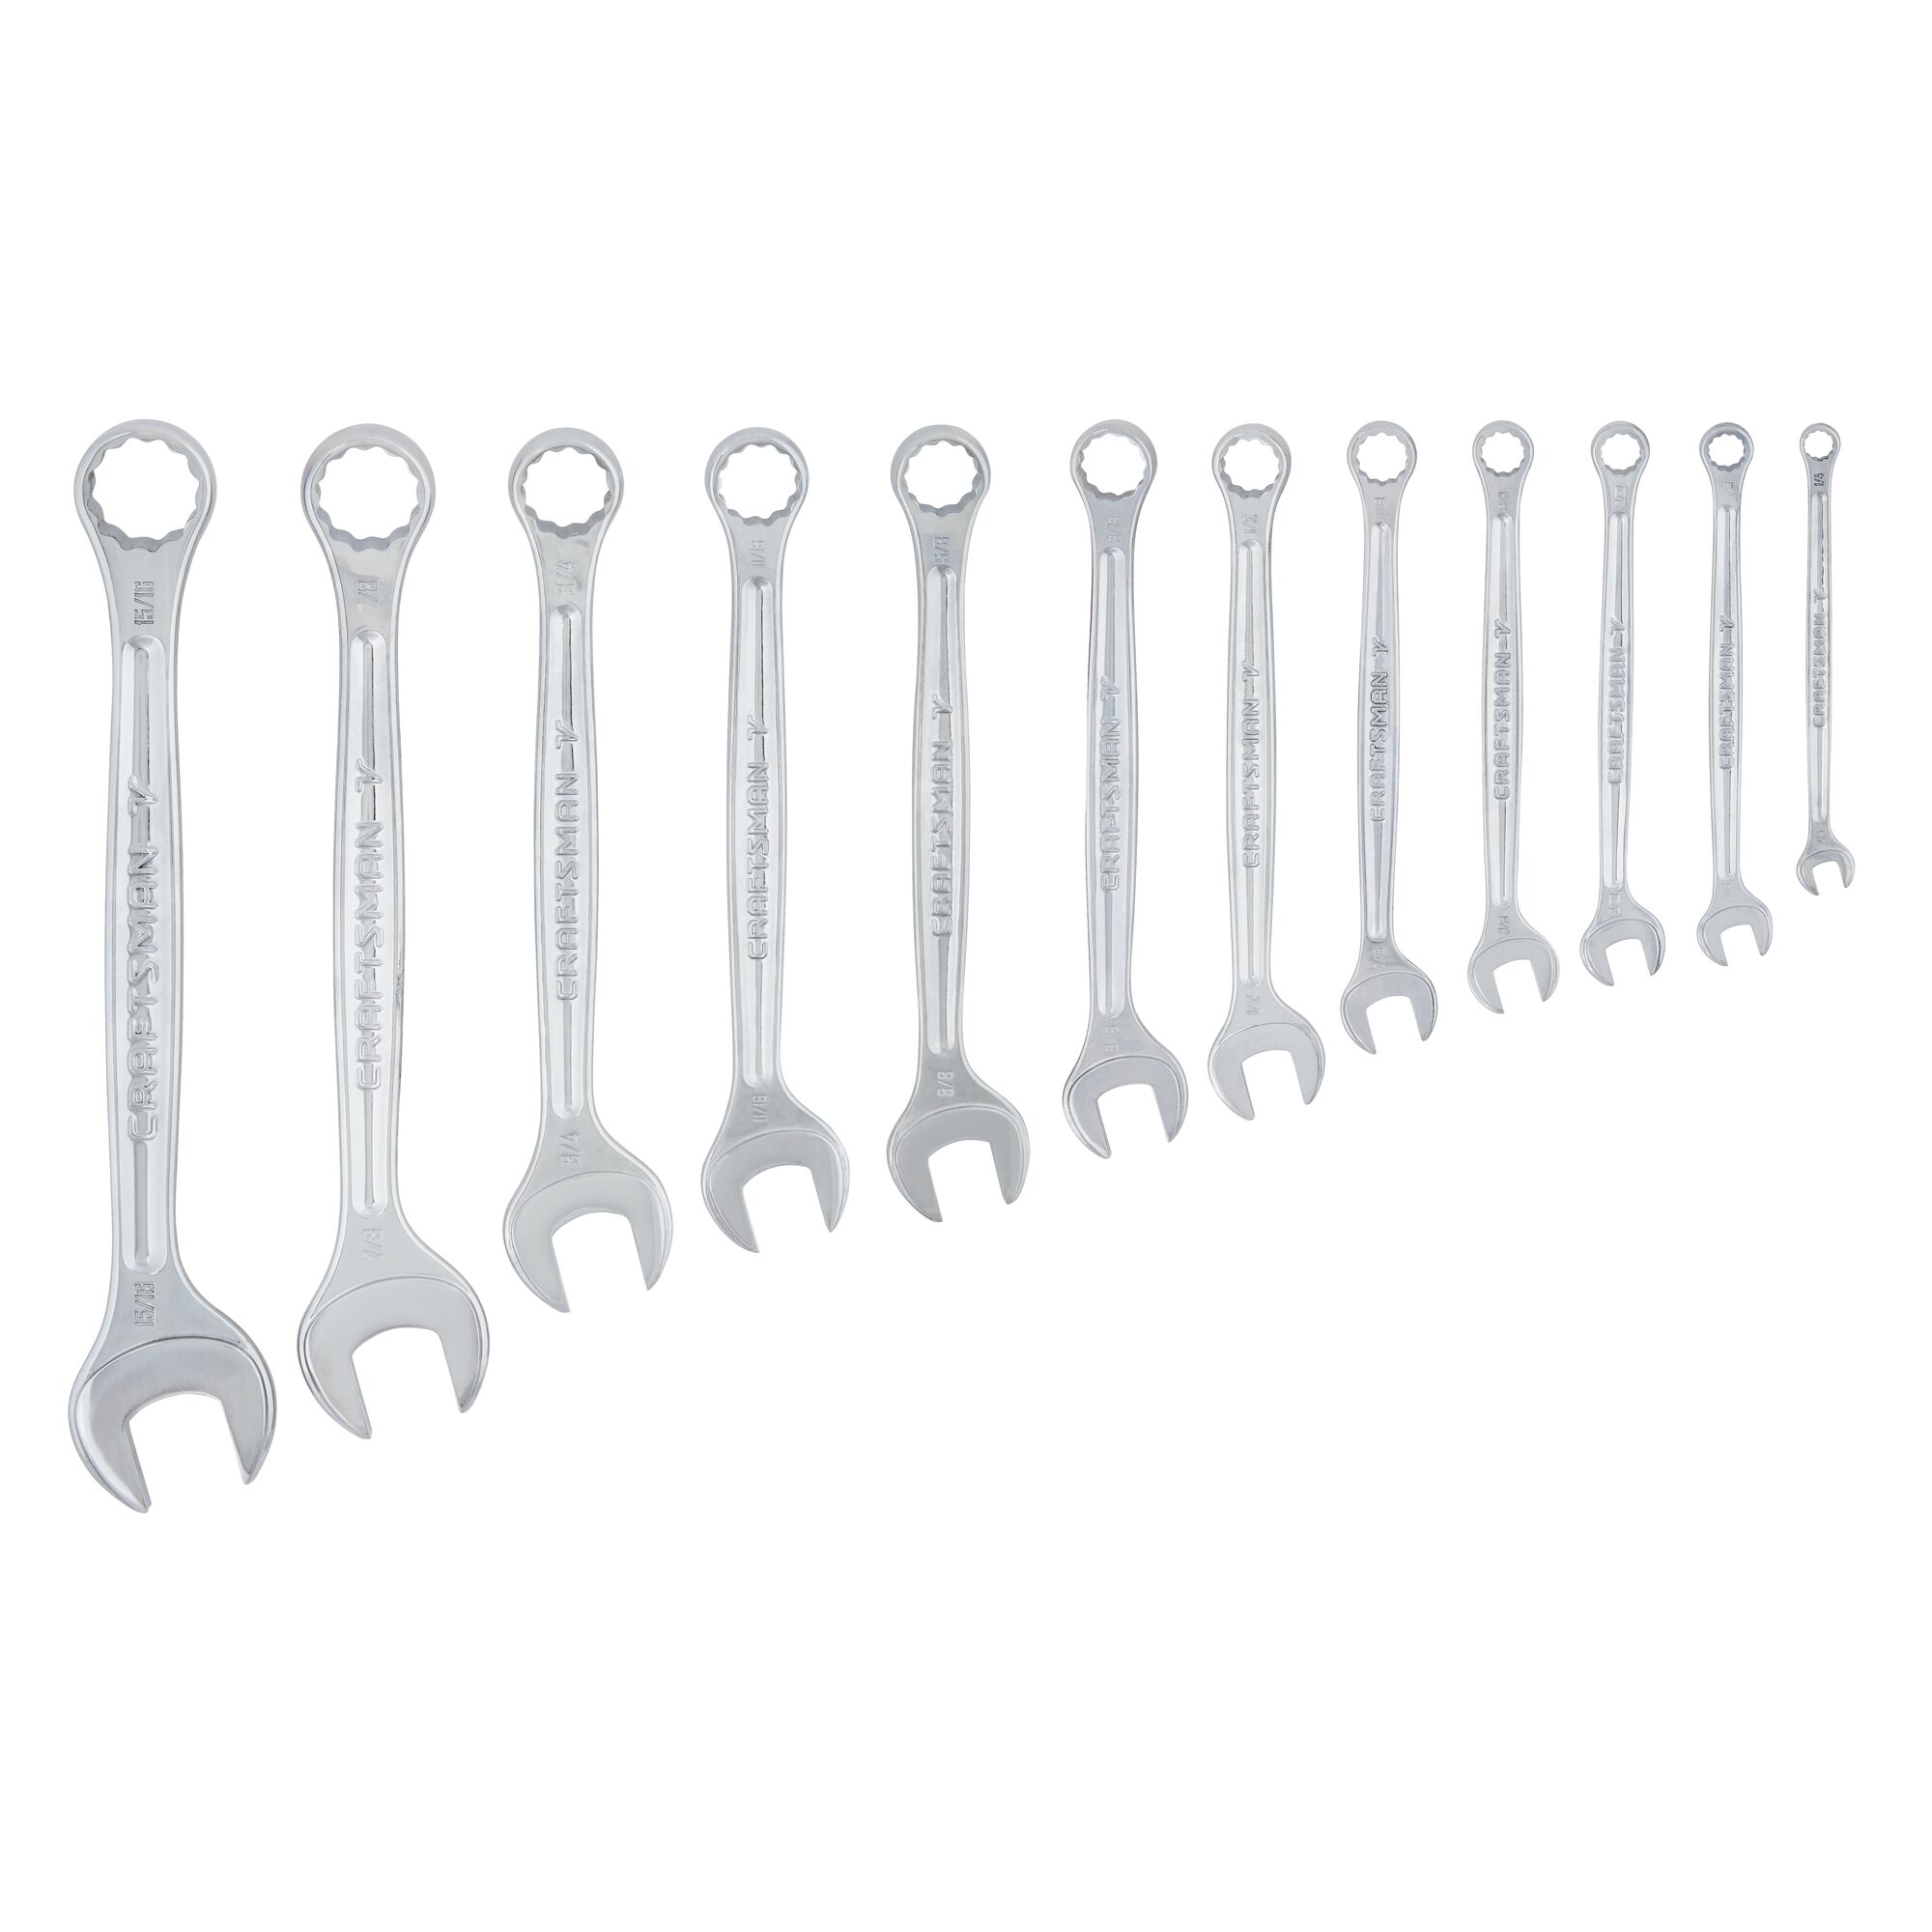 Profile of V series S A E combination wrench set (12 piece).